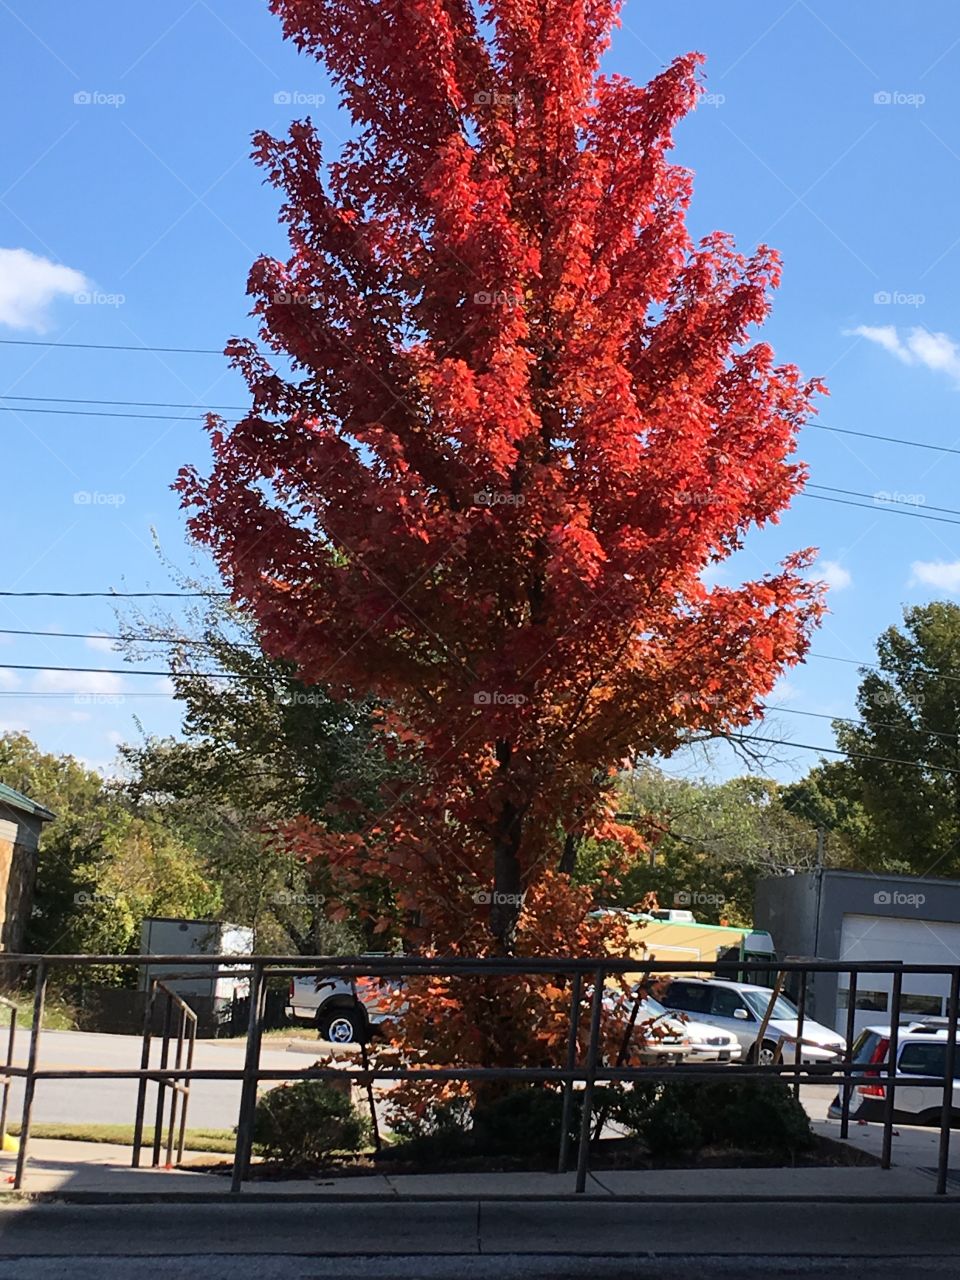 This is what fall is all about with all the vibrant colors! This tree with bright red.